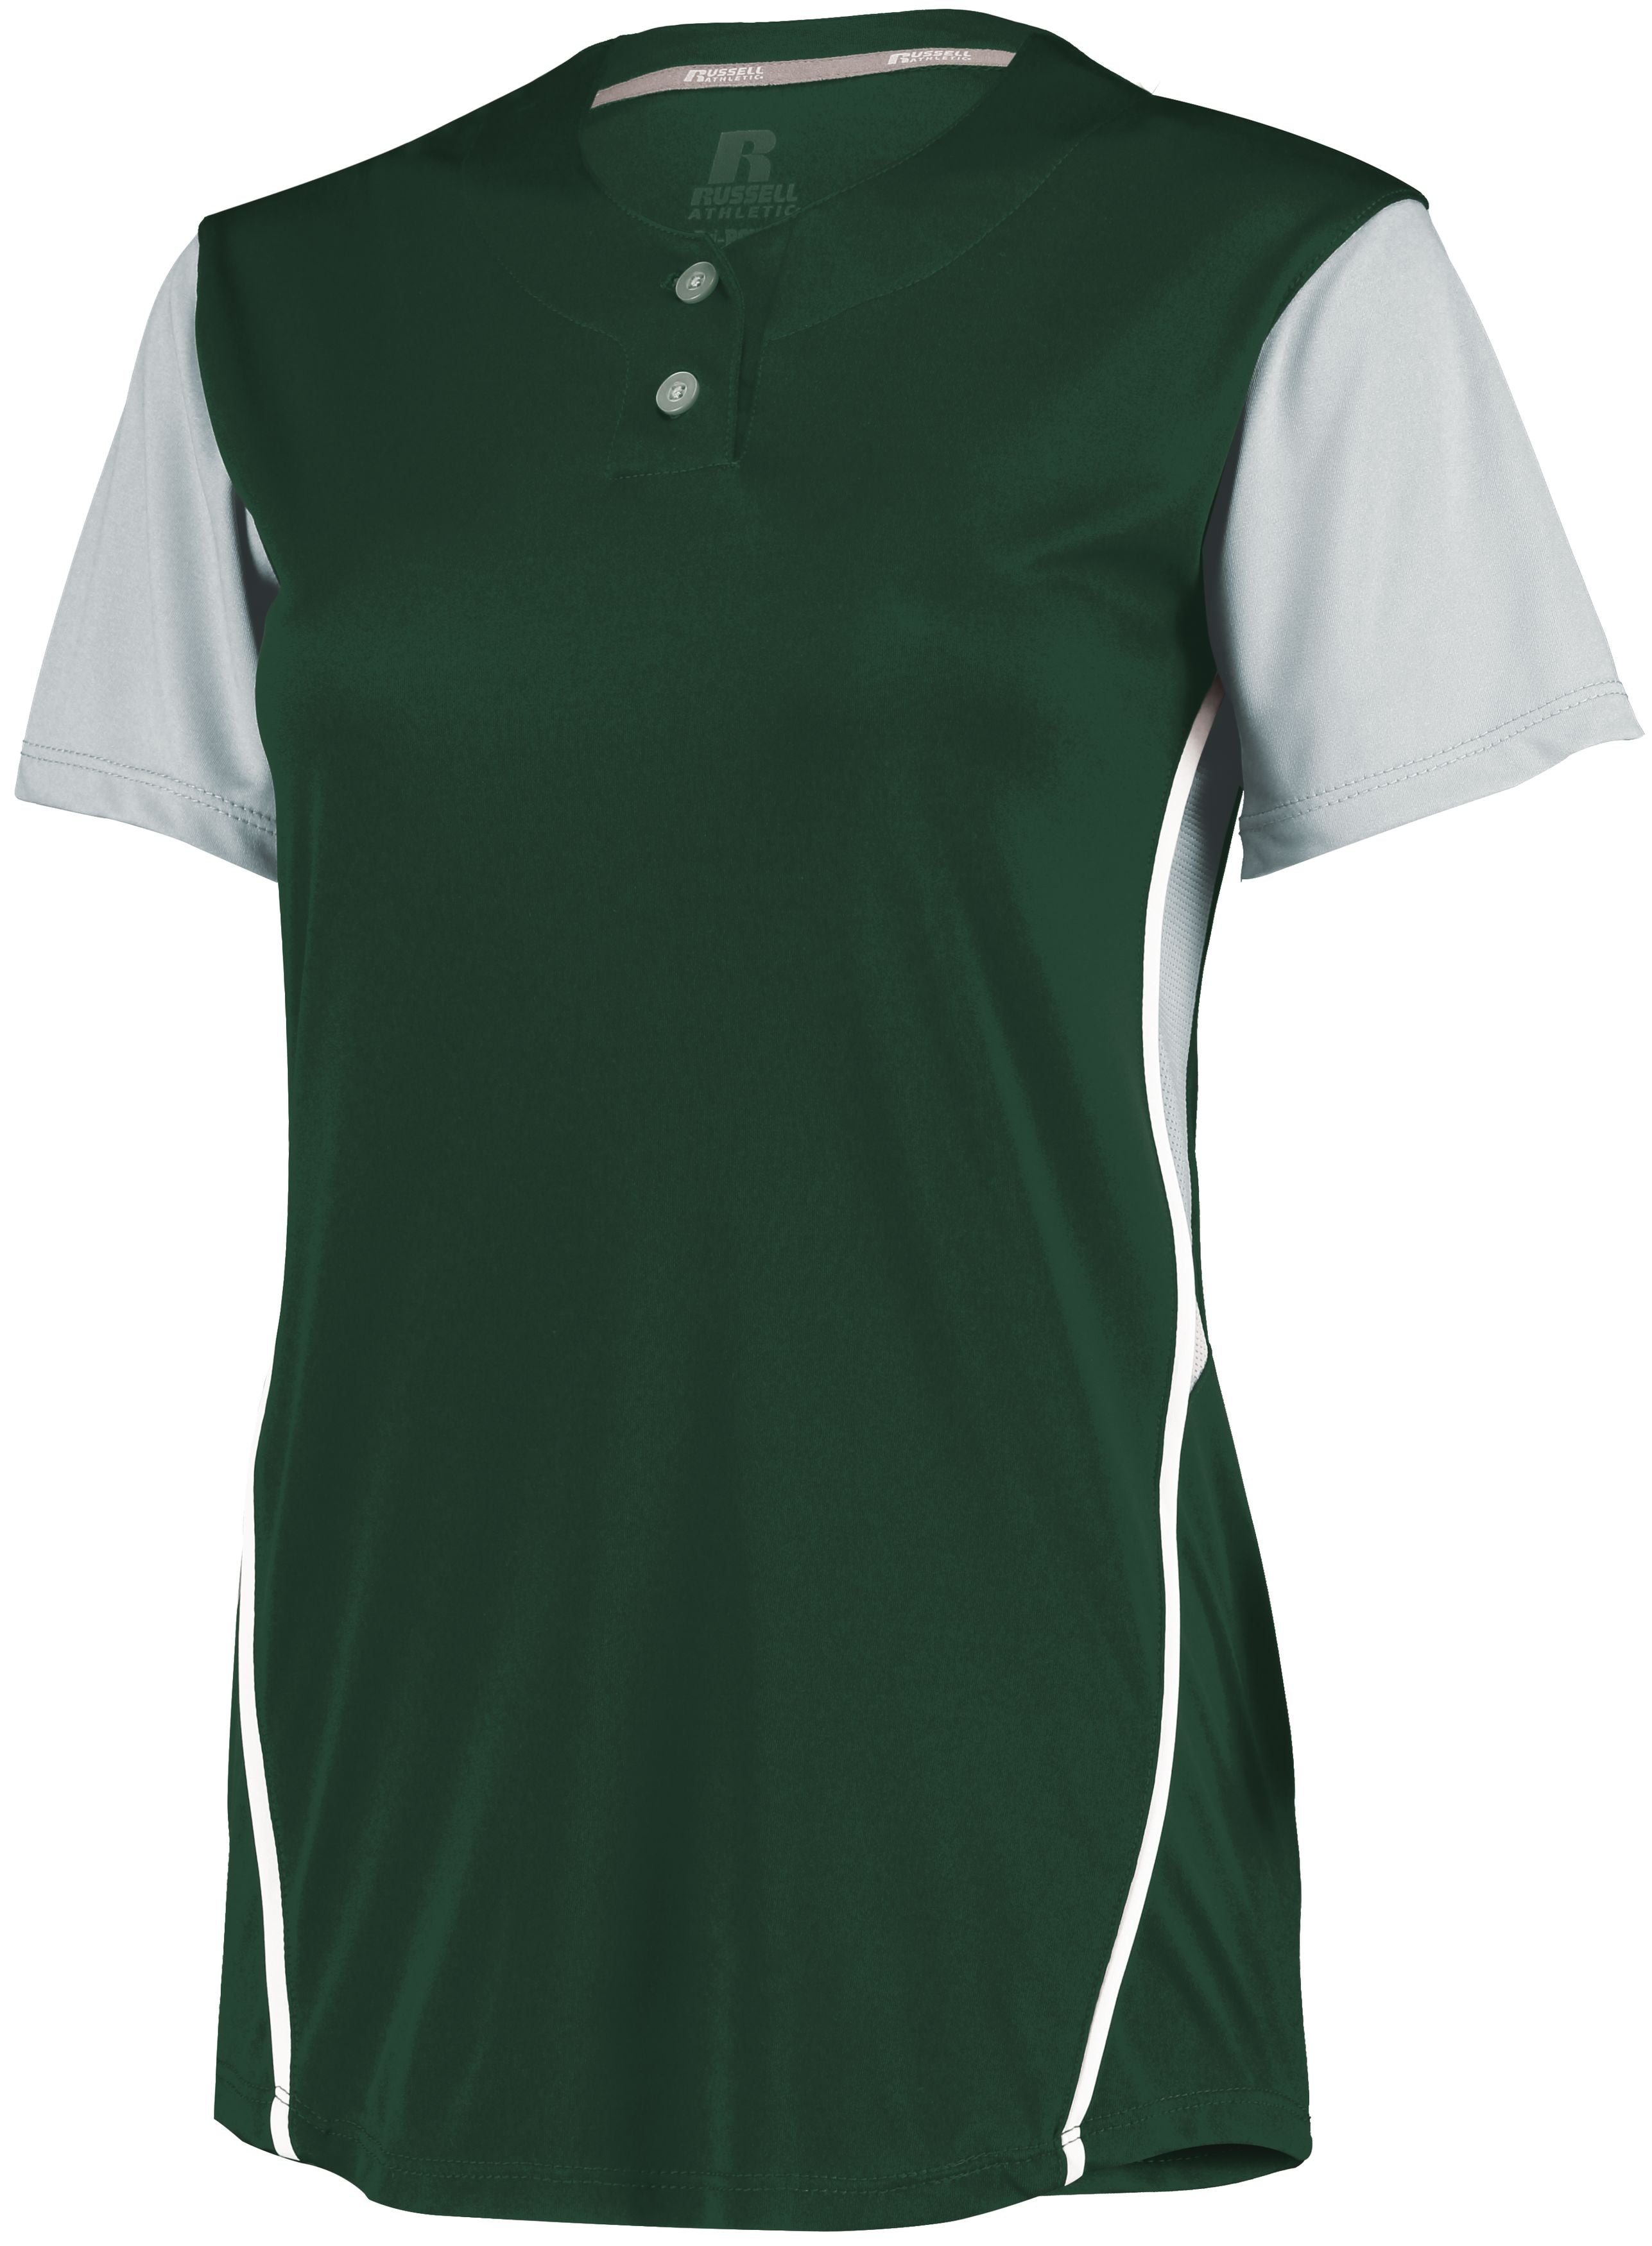 Russell Athletic Ladies Performance Two-Button Color Block Jersey in Dark Green/Baseball Grey  -Part of the Ladies, Ladies-Jersey, Softball, Russell-Athletic-Products, Shirts product lines at KanaleyCreations.com